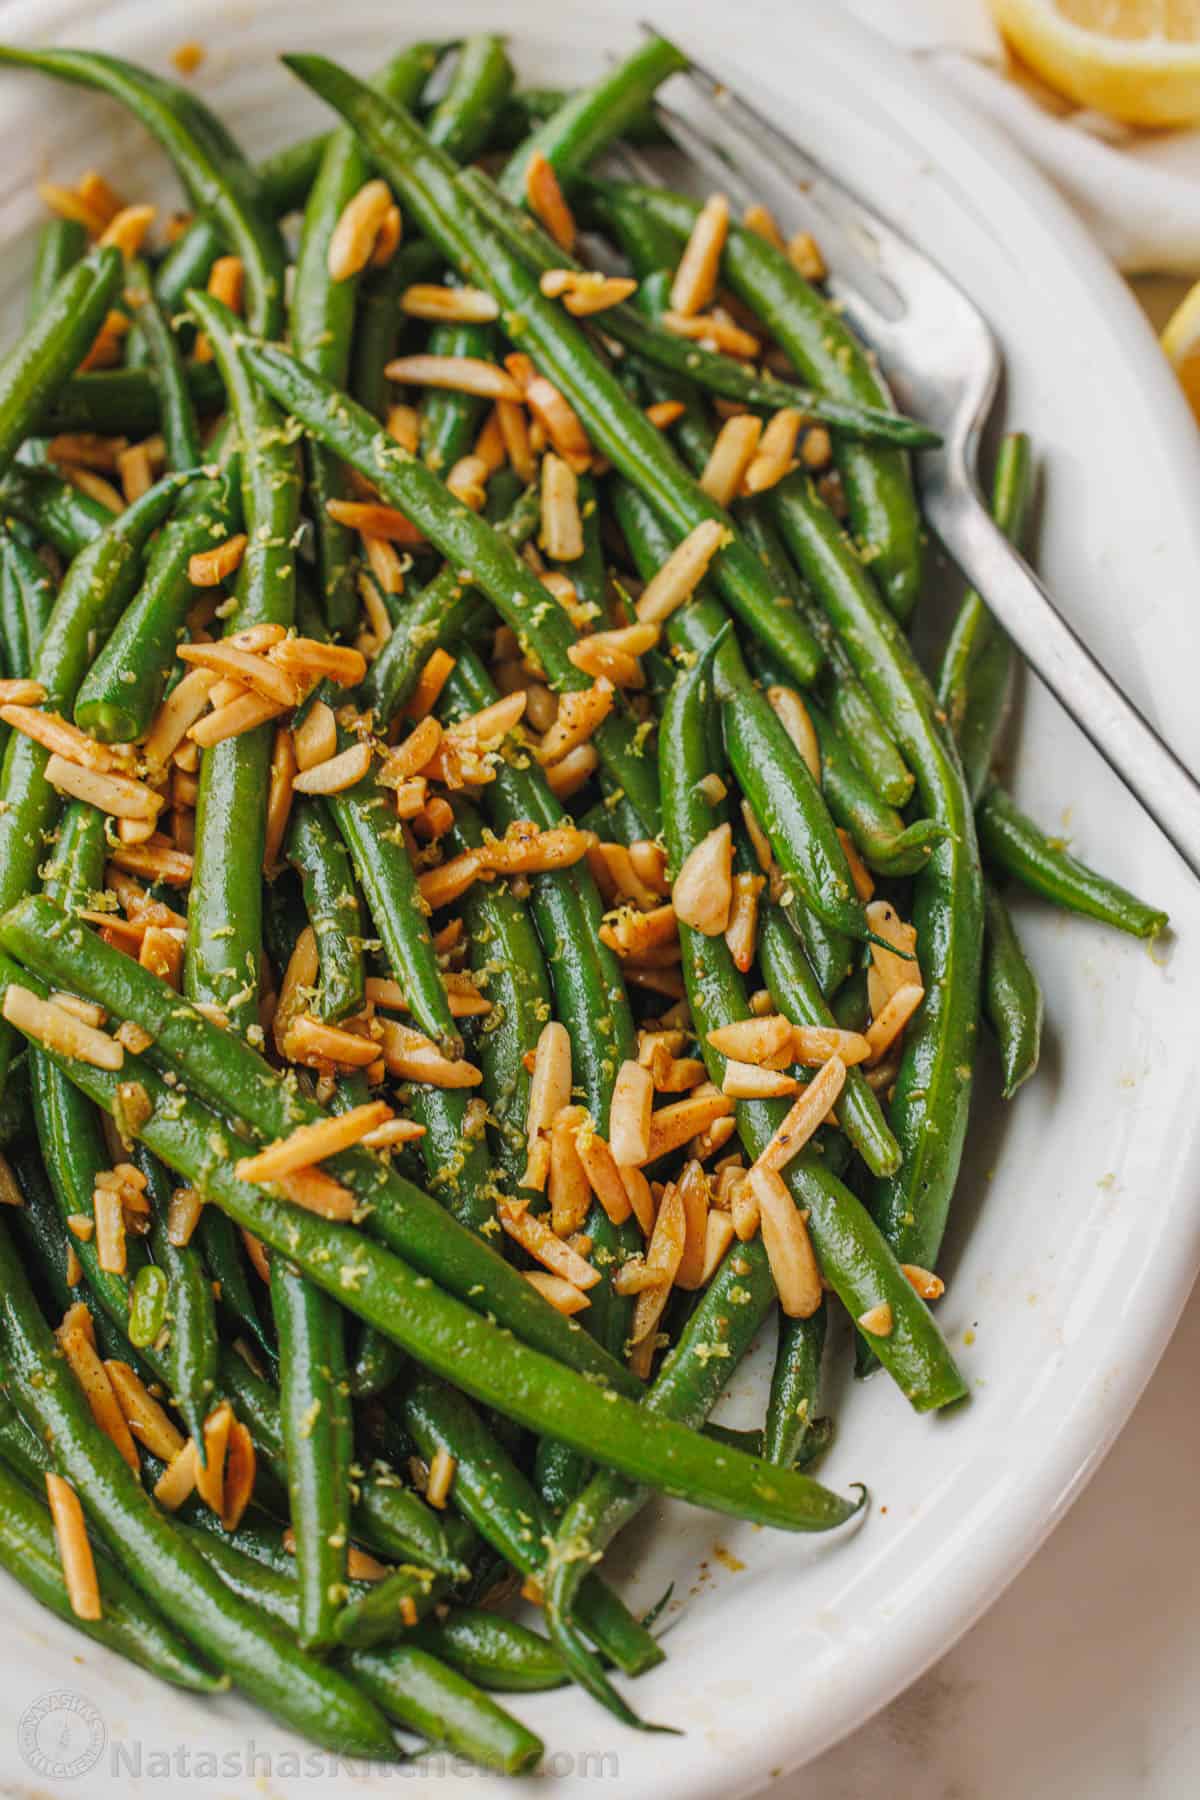 Green Beans Almondine served in a dish